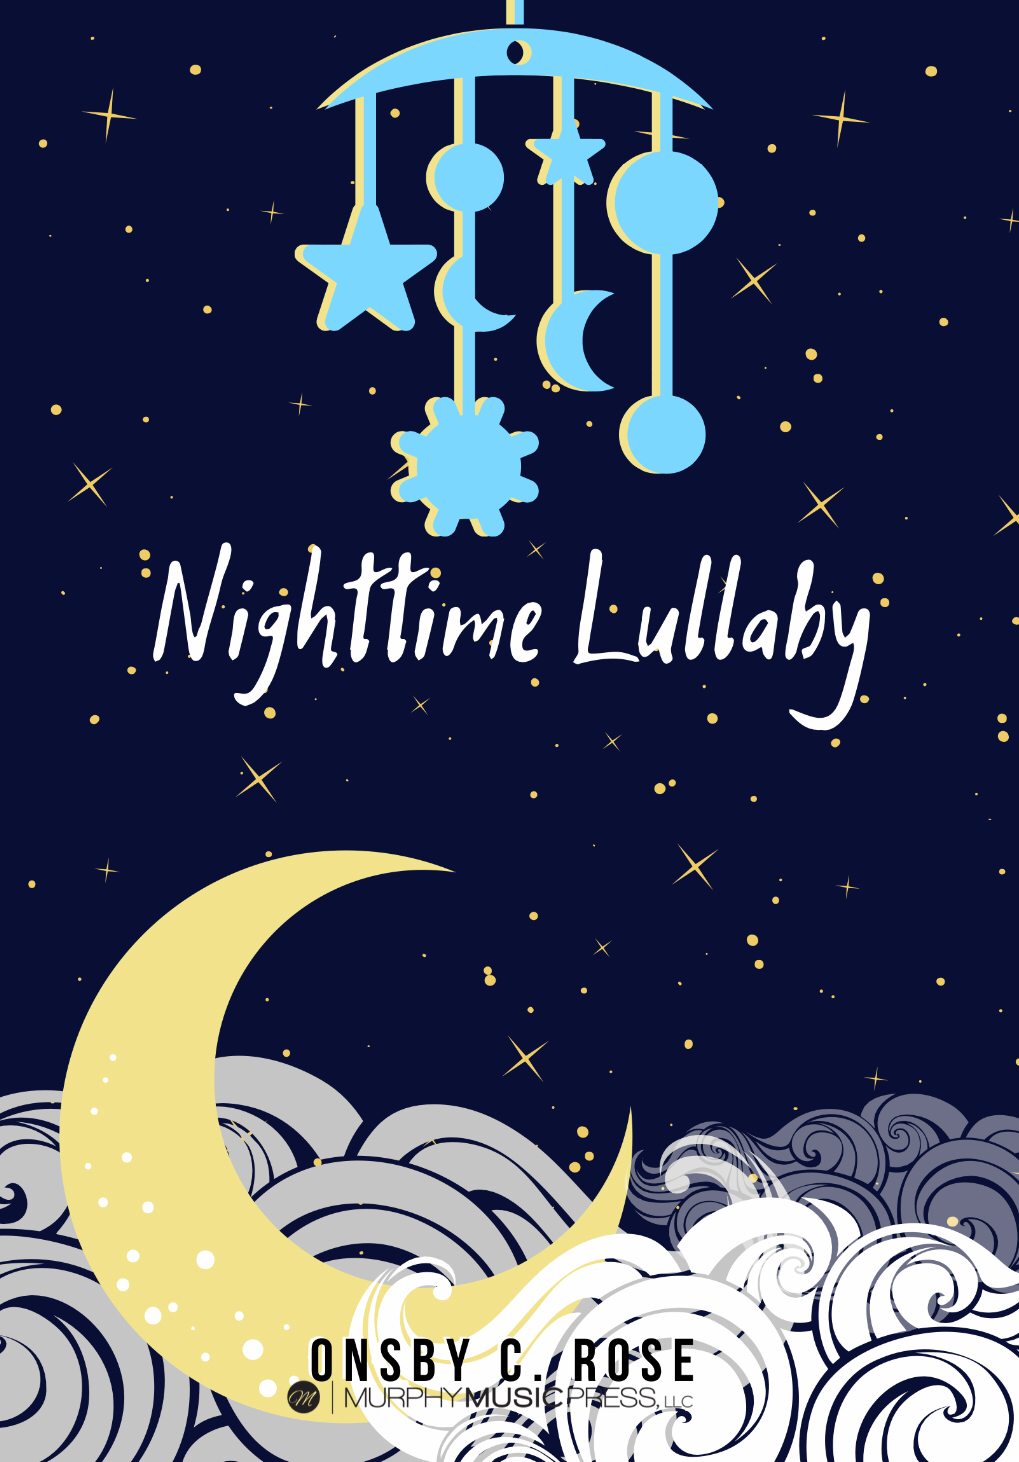 Nighttime Lullaby by Onsby C. Rose